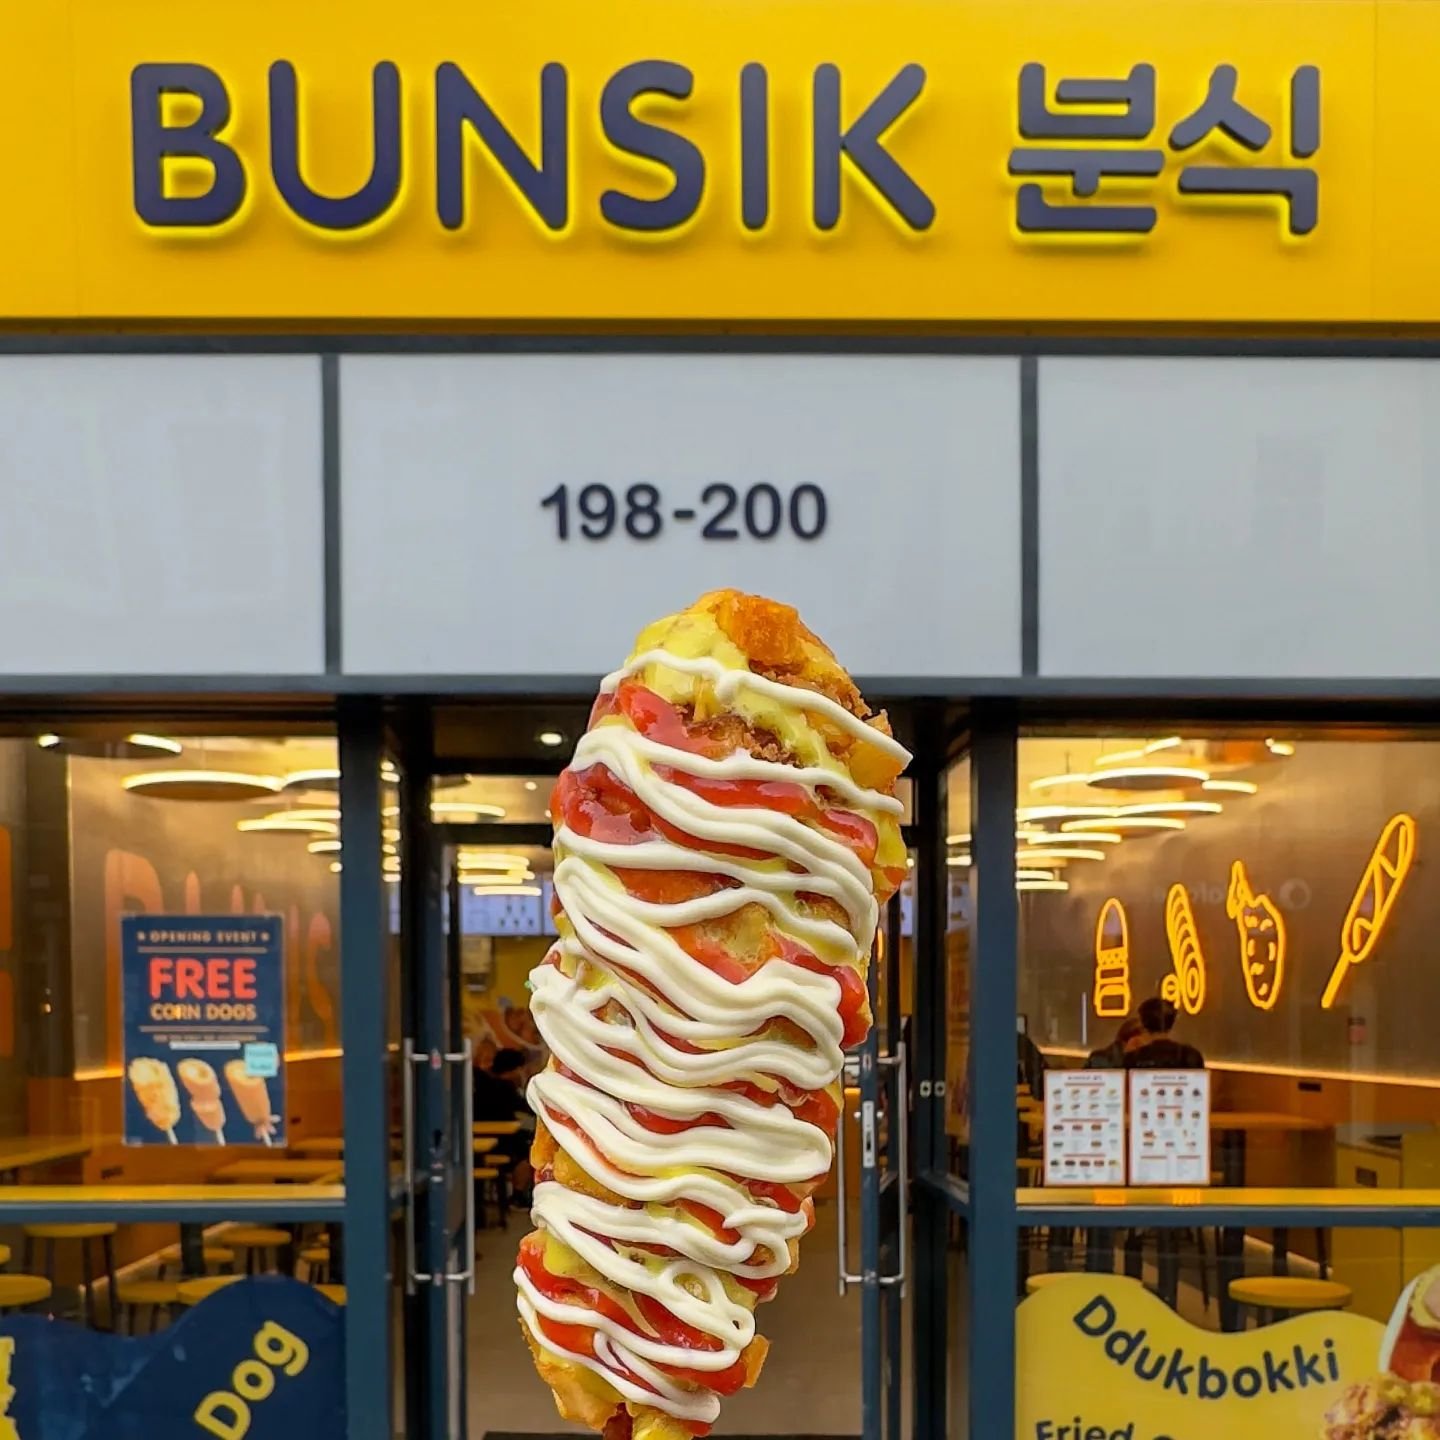 Korean street food legends @bunsik_london are now open in Earls Court! 

To celebrate they're giving away 100 Korean corn dogs with any other purchase to the first lucky customers from 11am today.

Check them out at 198-200 Earls Court Road.